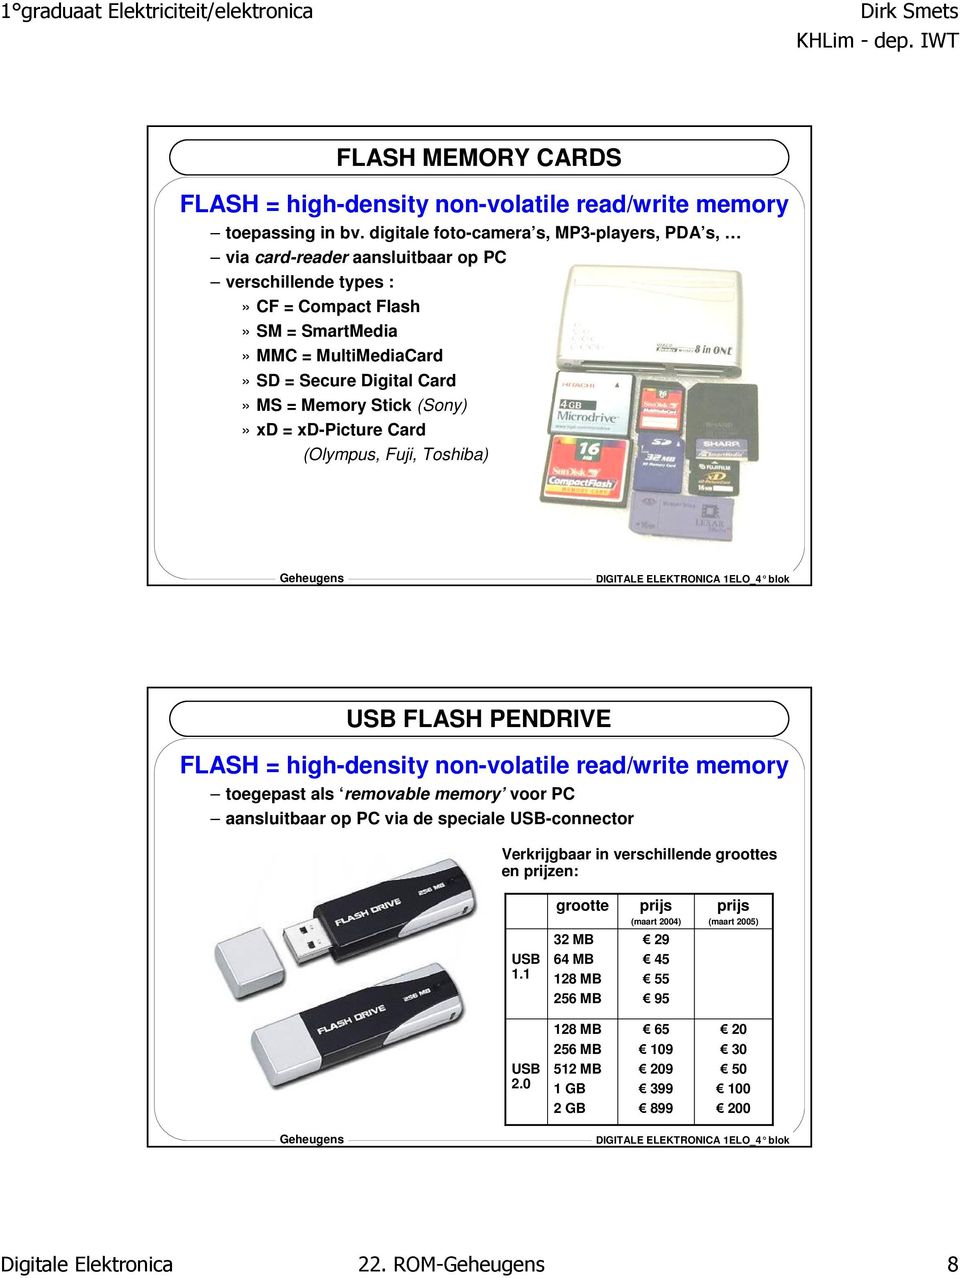 MultiMediaCard» SD = Secure Digital Card» MS = Memory Stick (Sony)» xd = xd-picture Card (Olympus, Fuji, Toshiba) USB FLASH PENDRIVE toegepast als